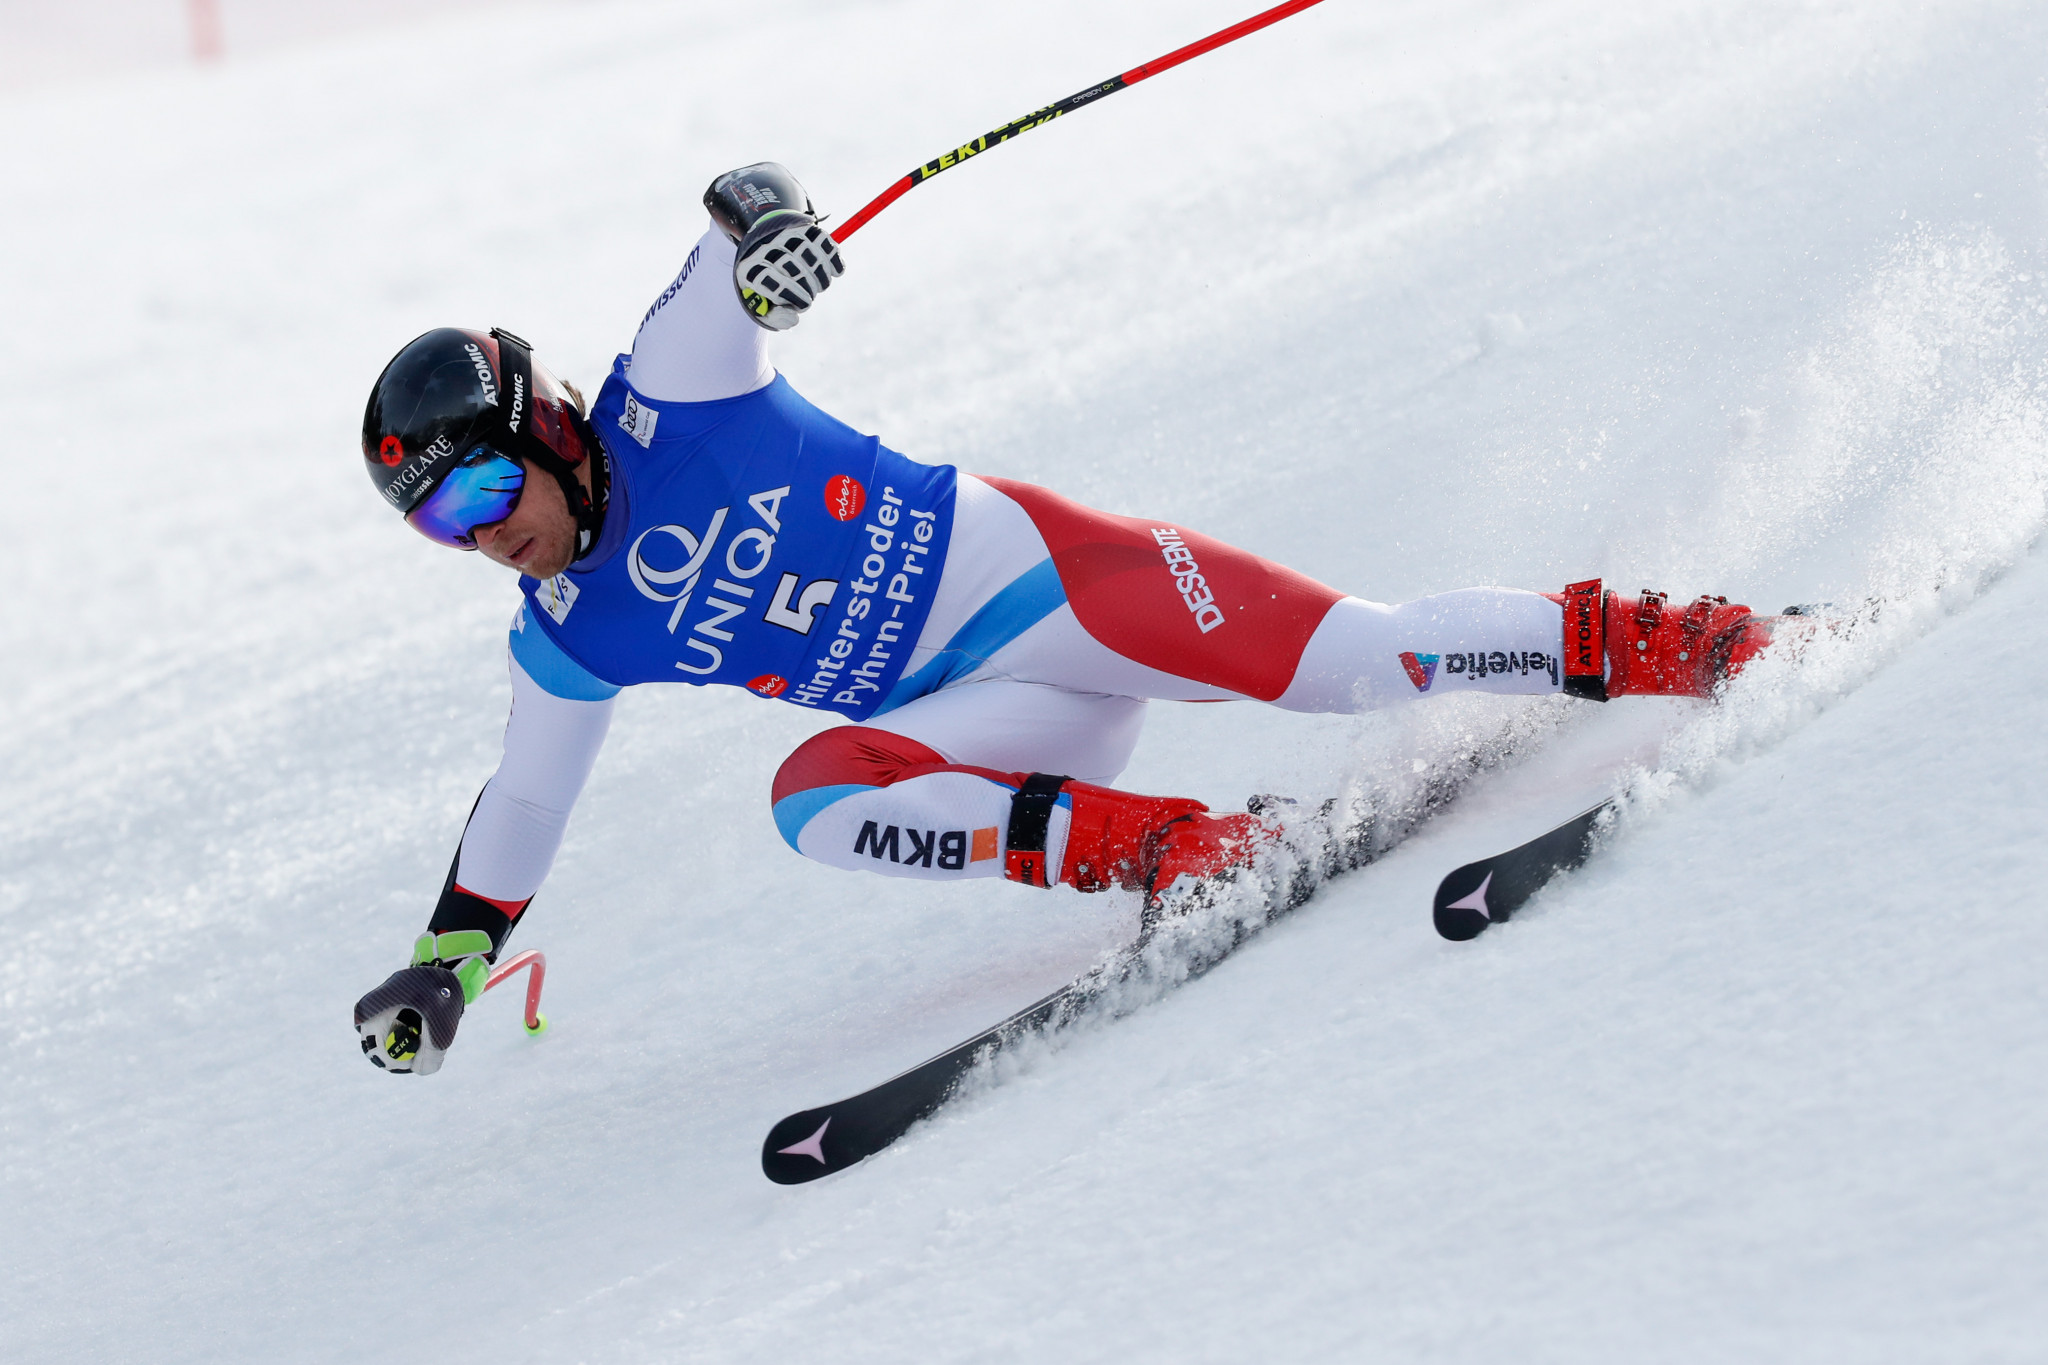 Mauro Caviezel of Switzerland finished second in Hinterstoder, but tops the Super-G World Cup standings ©Getty Images